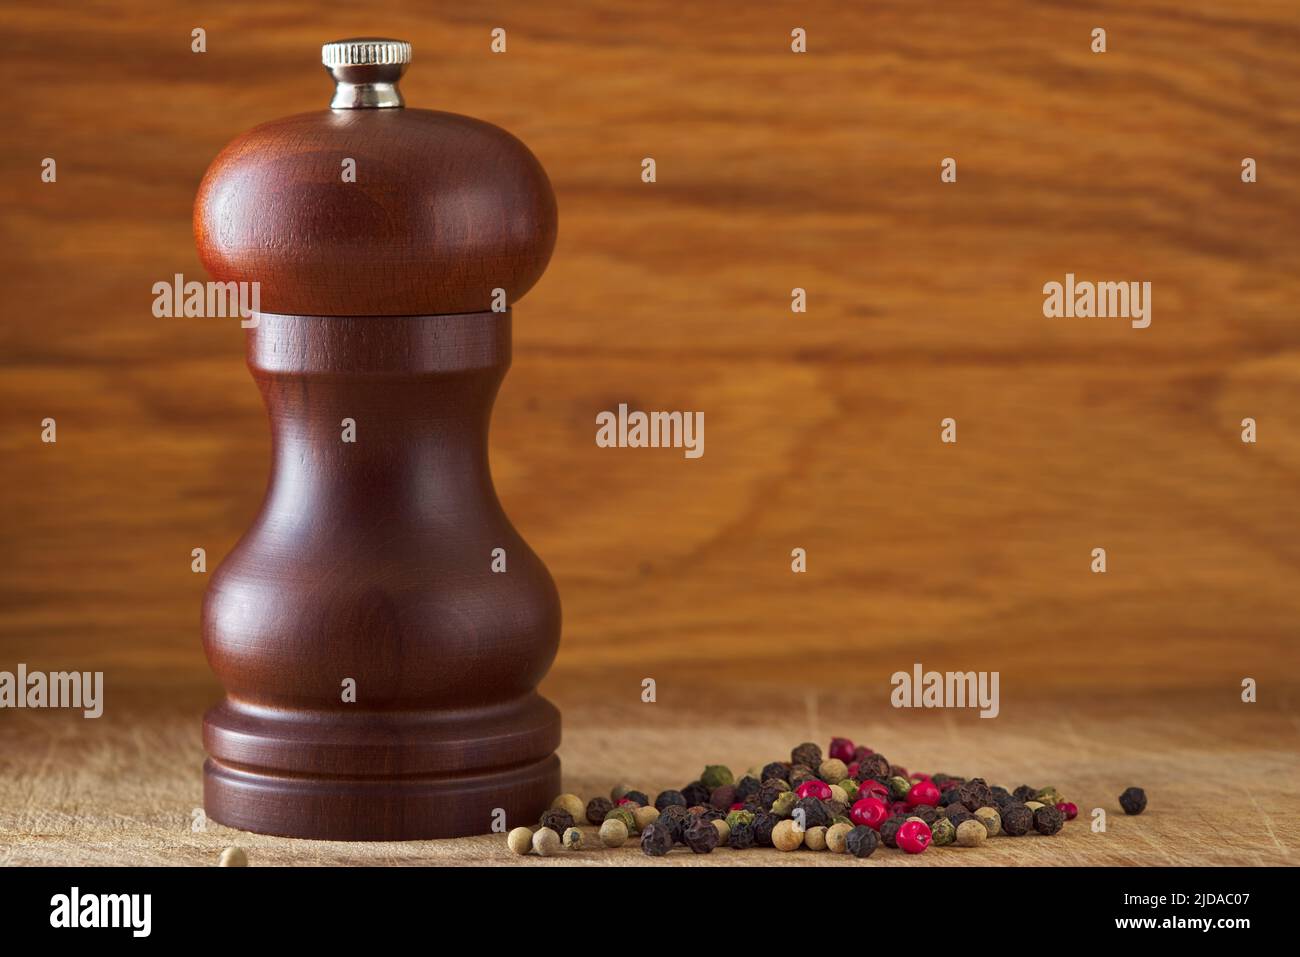 Wooden brown grinding salt and pepper shaker on wood with colored peppercorns and copy space Stock Photo